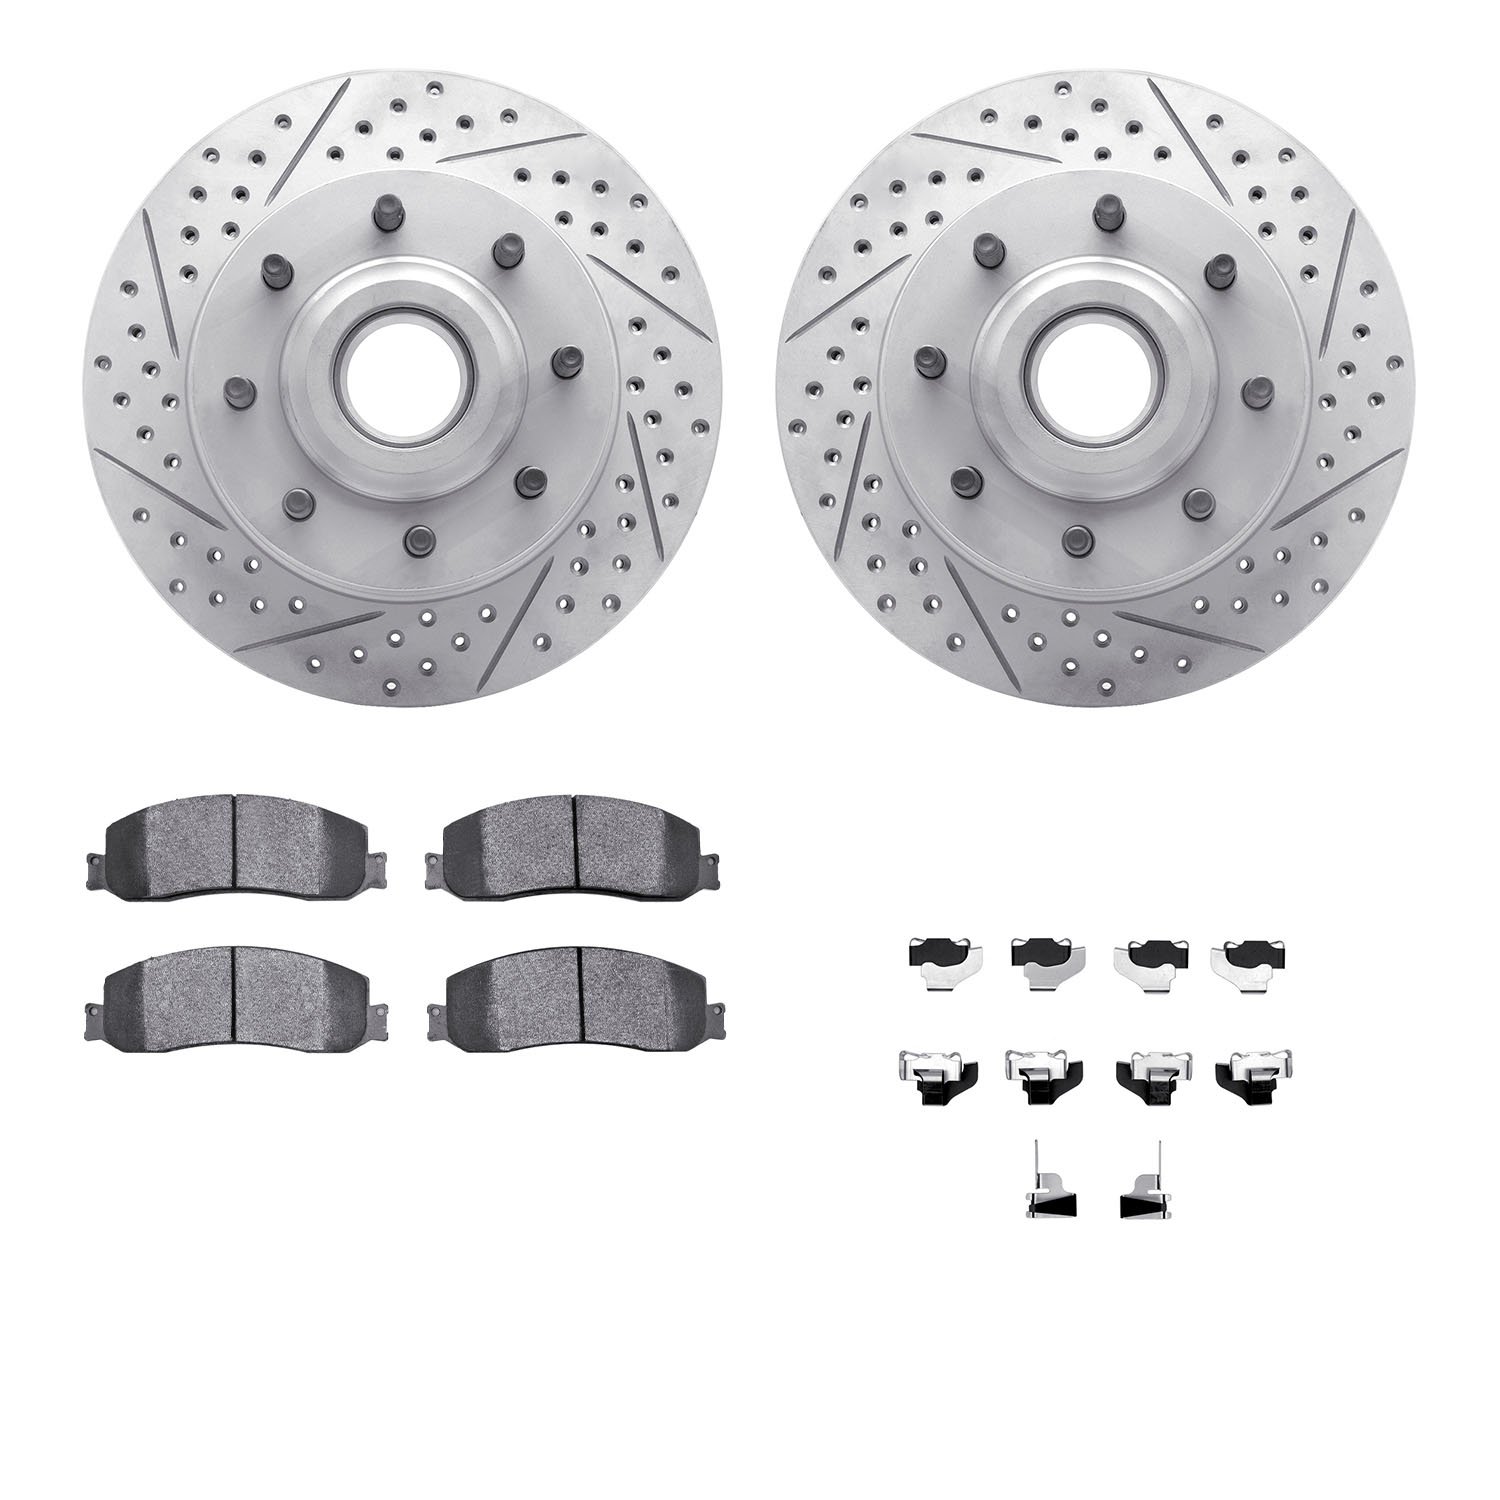 2212-99169 Geoperformance Drilled/Slotted Rotors w/Heavy-Duty Pads Kit & Hardware, 2012-2012 Ford/Lincoln/Mercury/Mazda, Positio